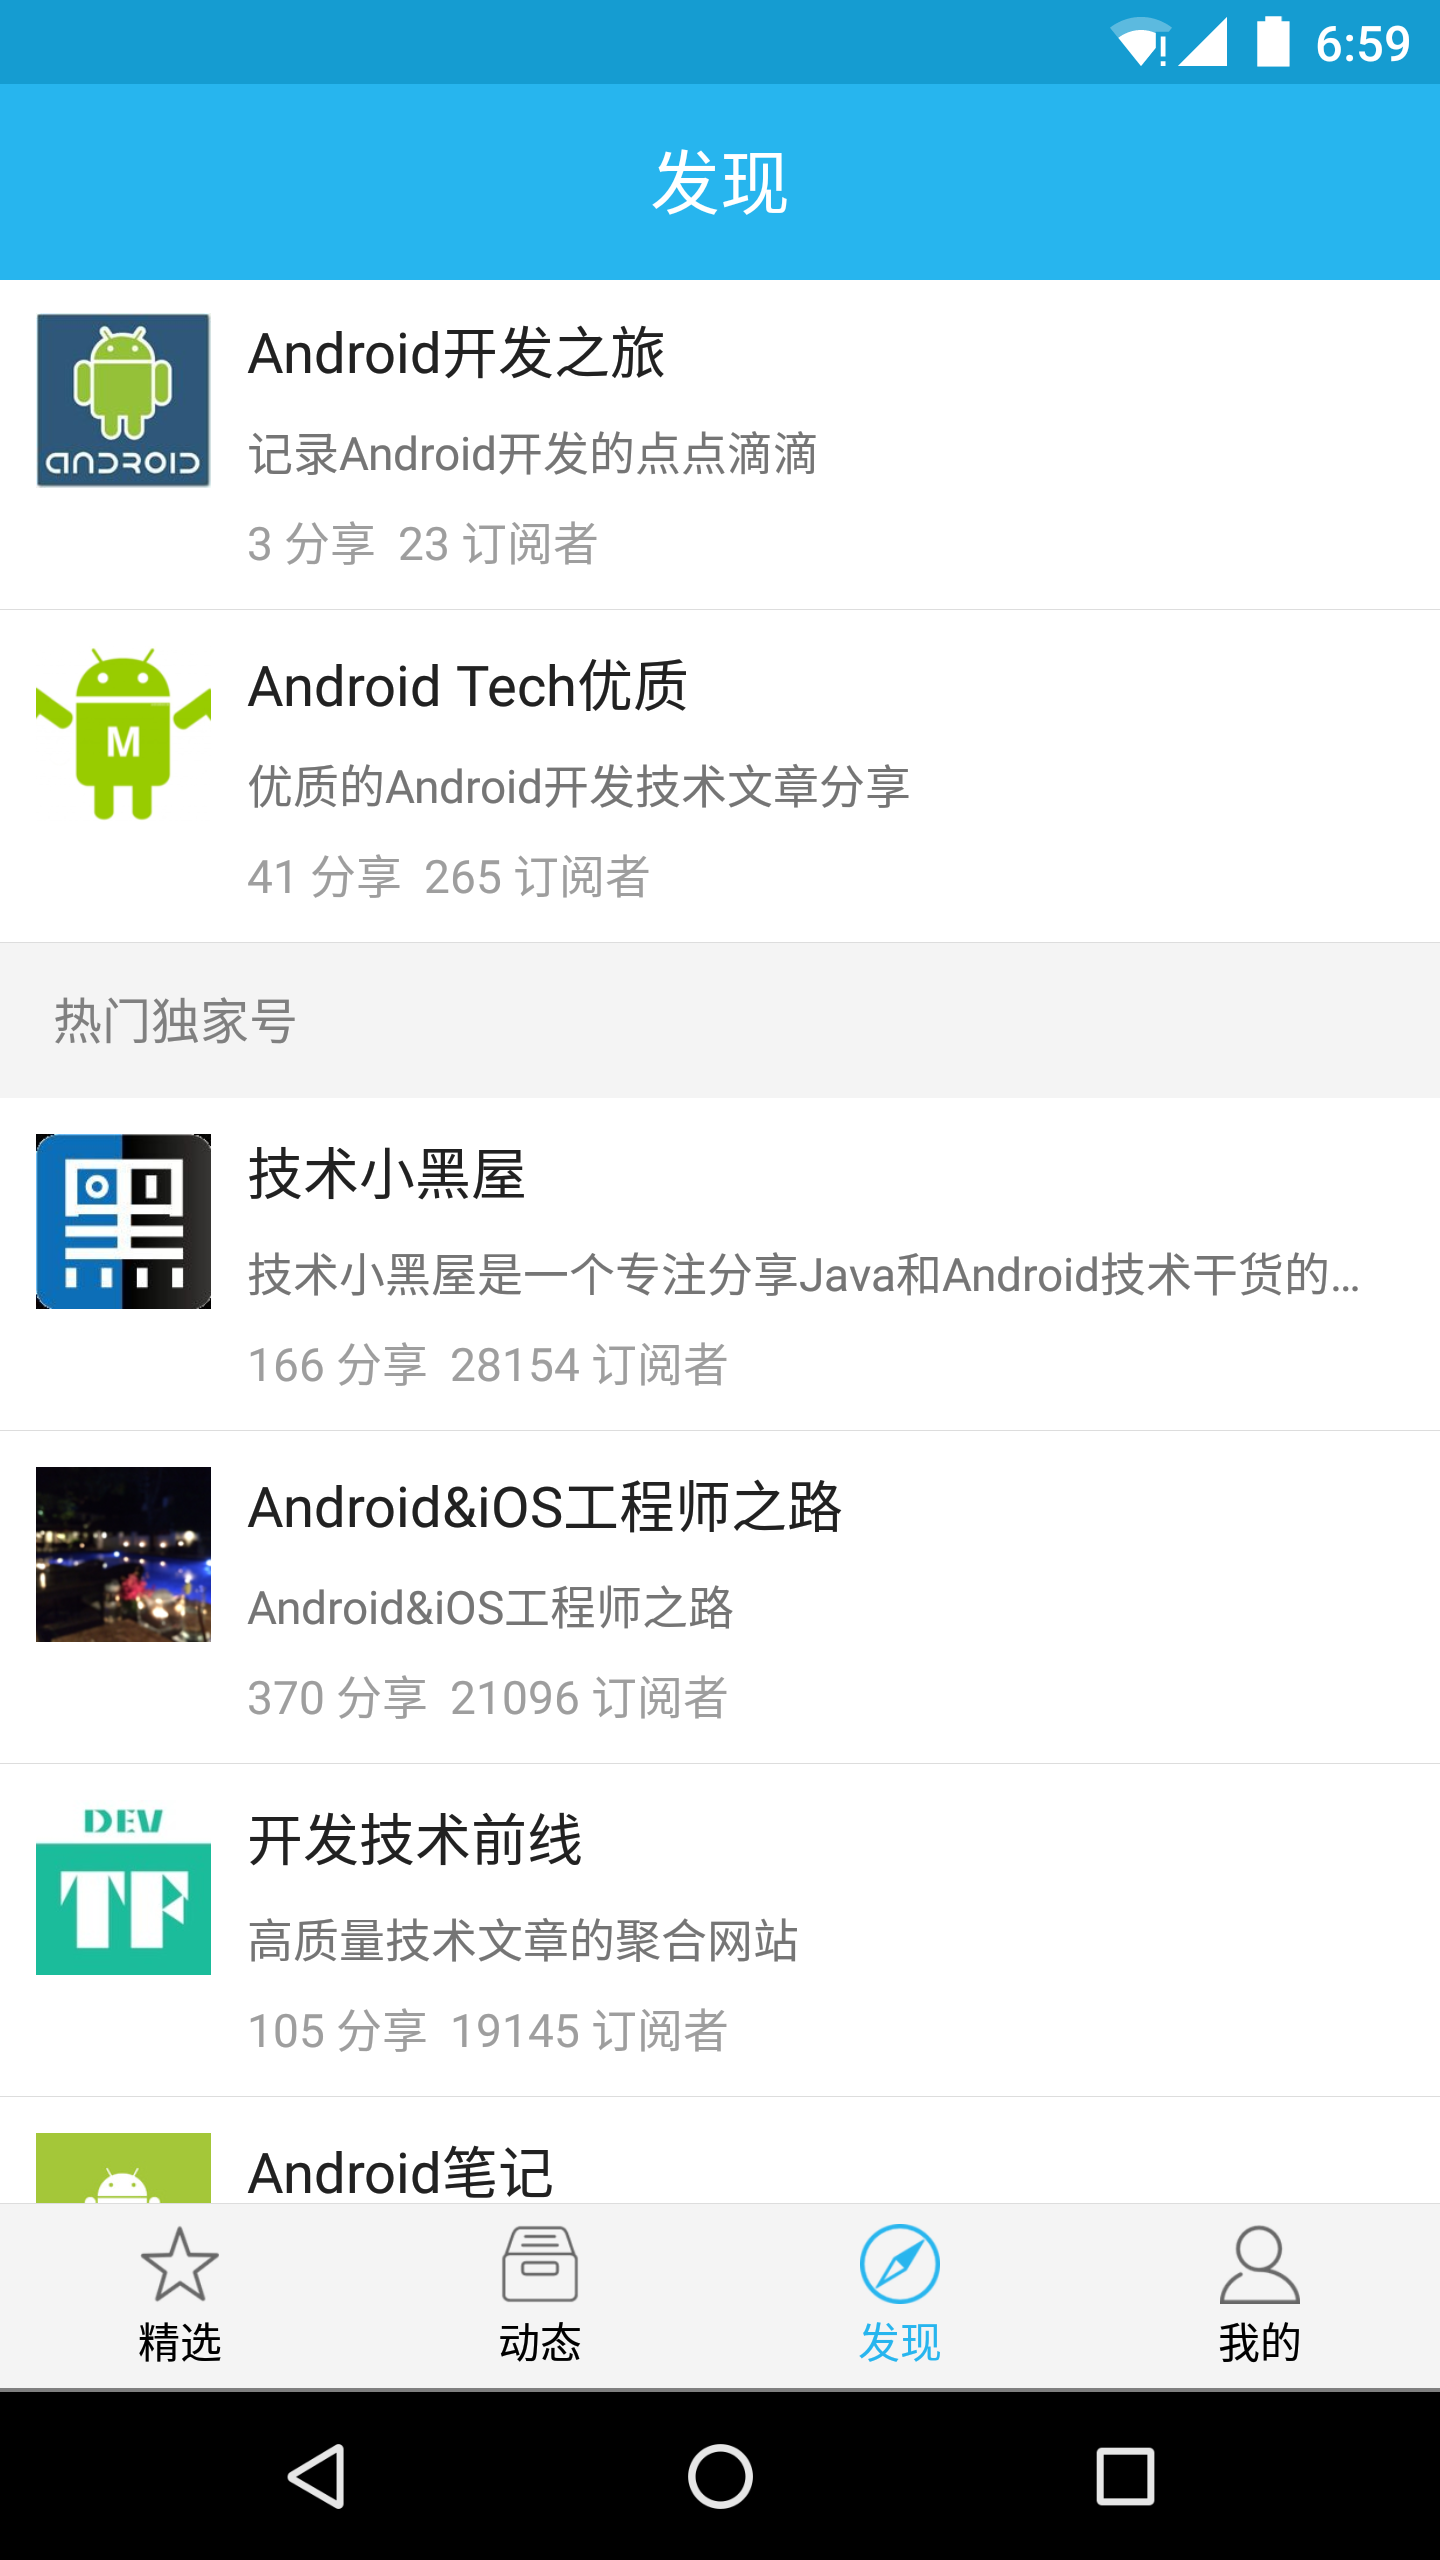 Android工程师截图3